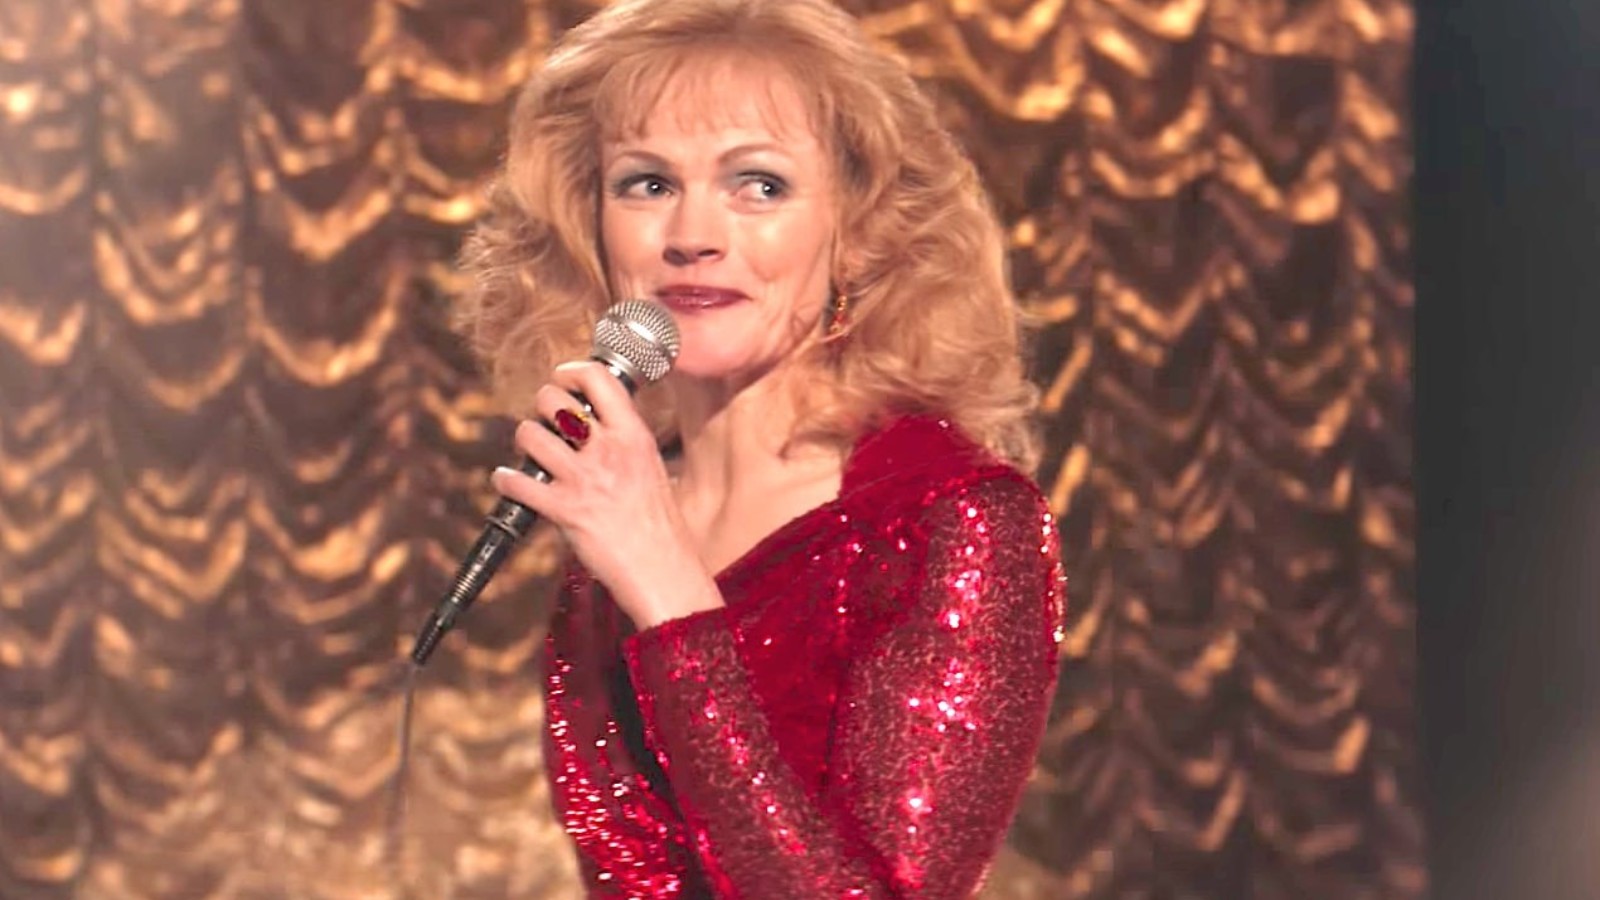 A woman with blonde hair wears a red glittering dress and holds a microphone smiling. She stands in front of a gold, scalloped curtain.